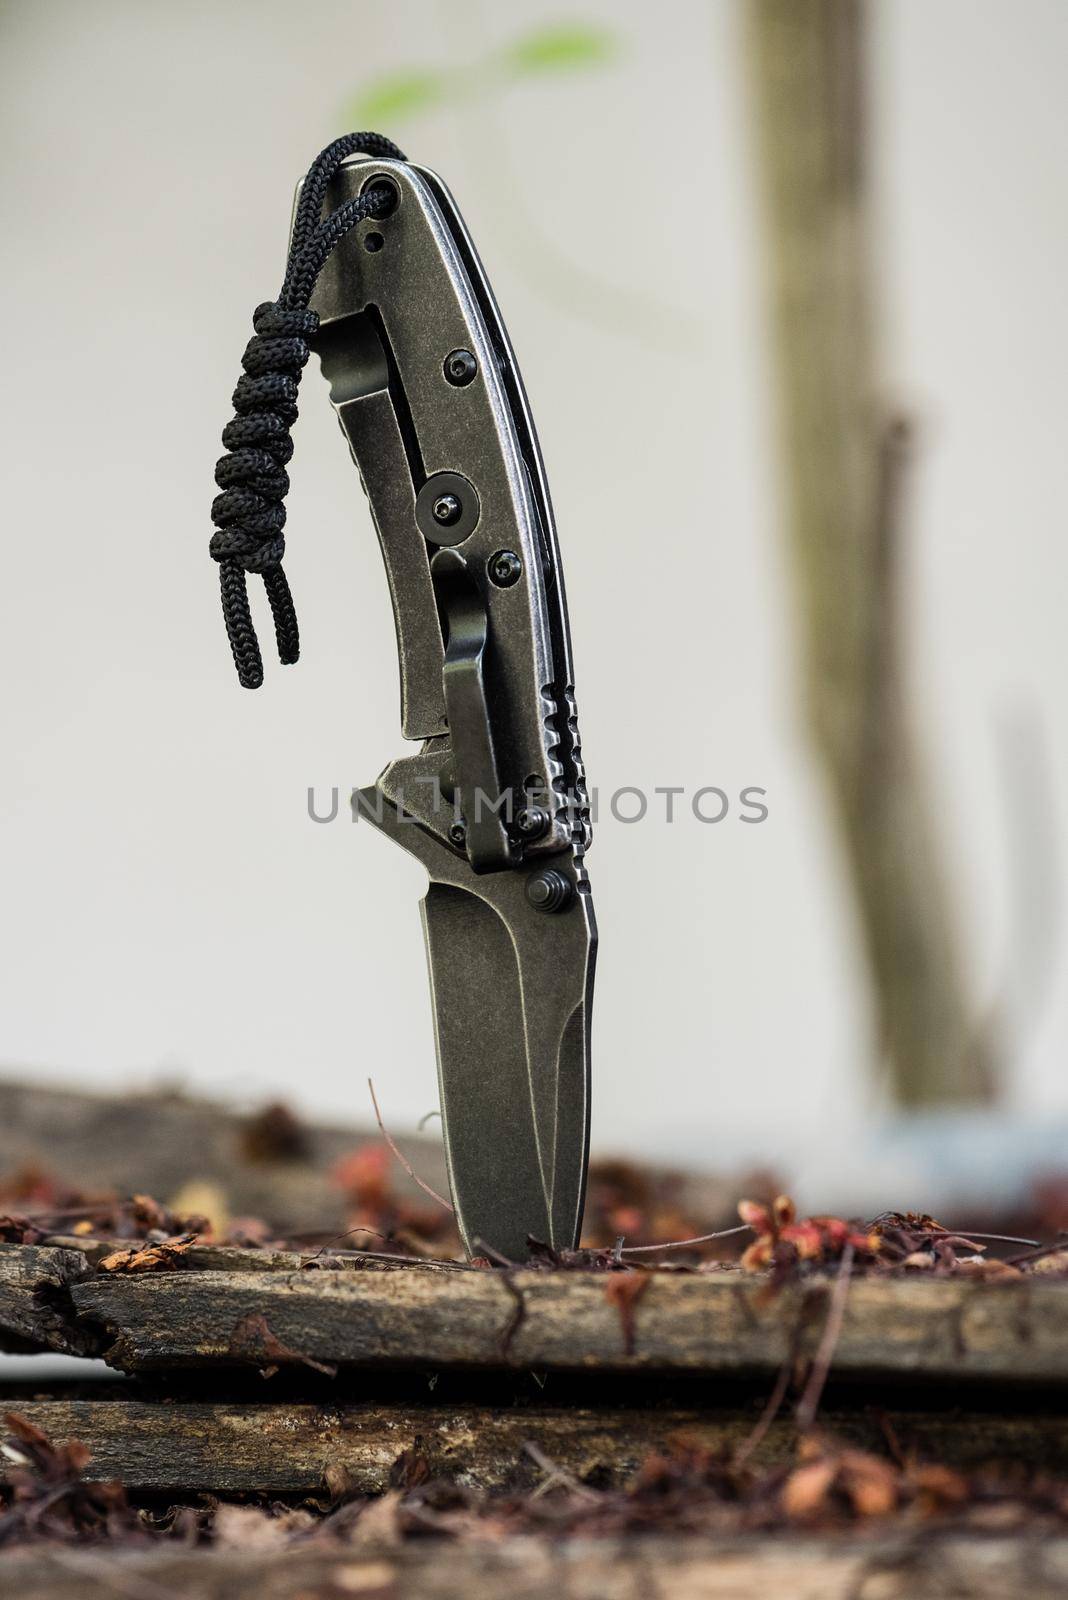 stainless steel pocketknife with blackwash finish on blade and handle